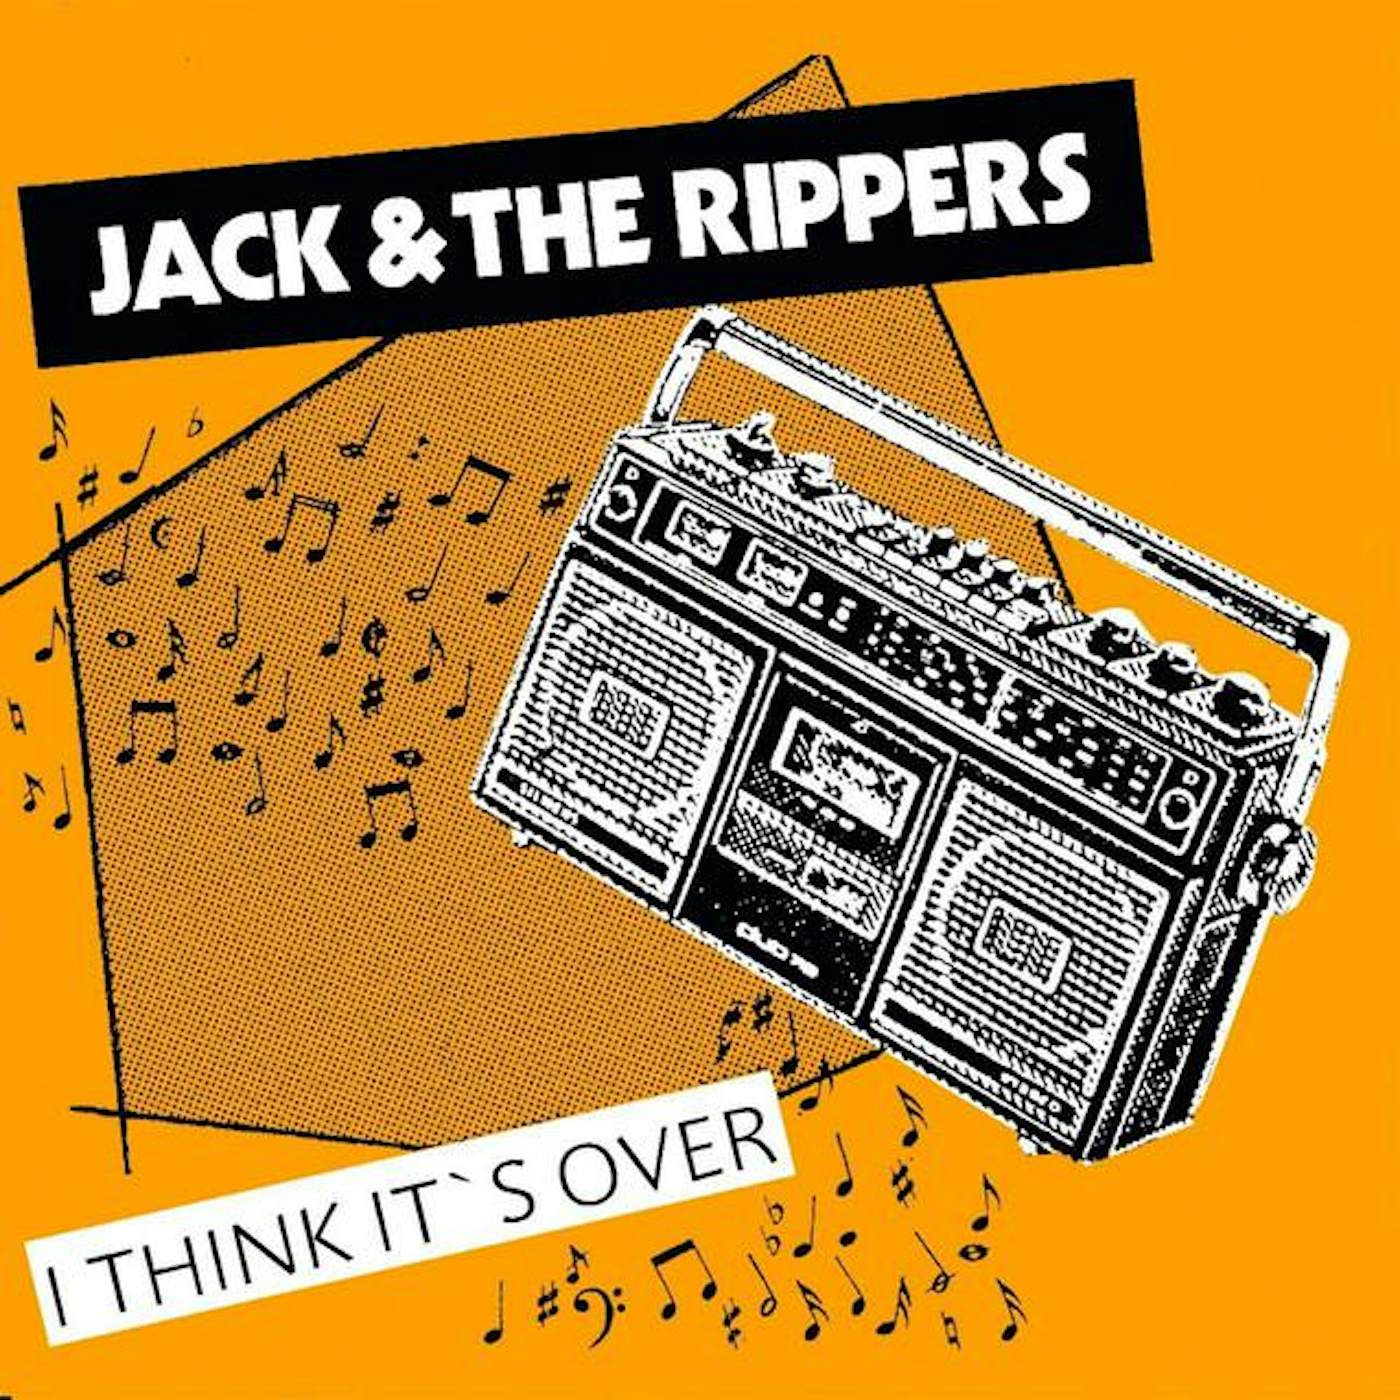 Jack & The Rippers